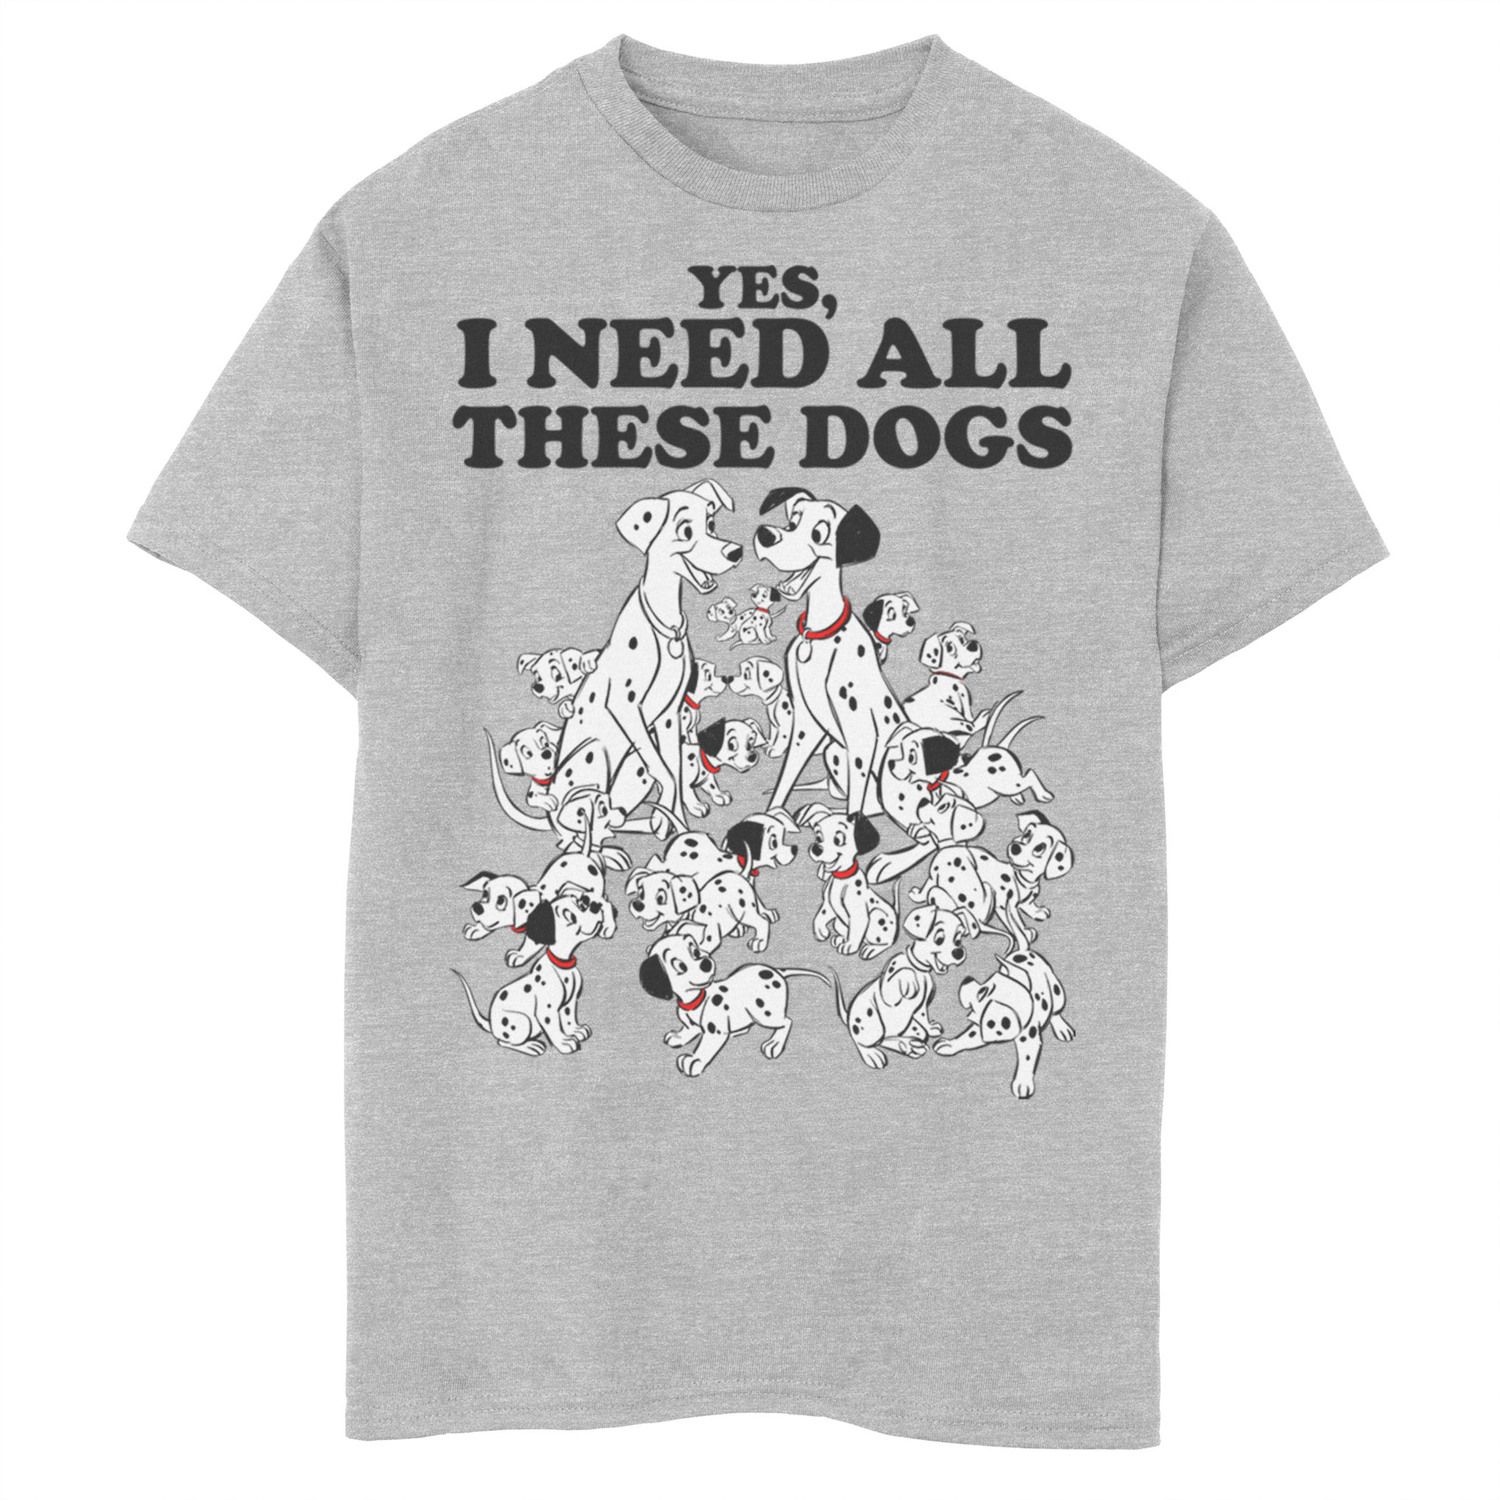 Image for Disney 's 101 Dalmatians Boys 8-20 Yes I Need All These Dogs Tee at Kohl's.